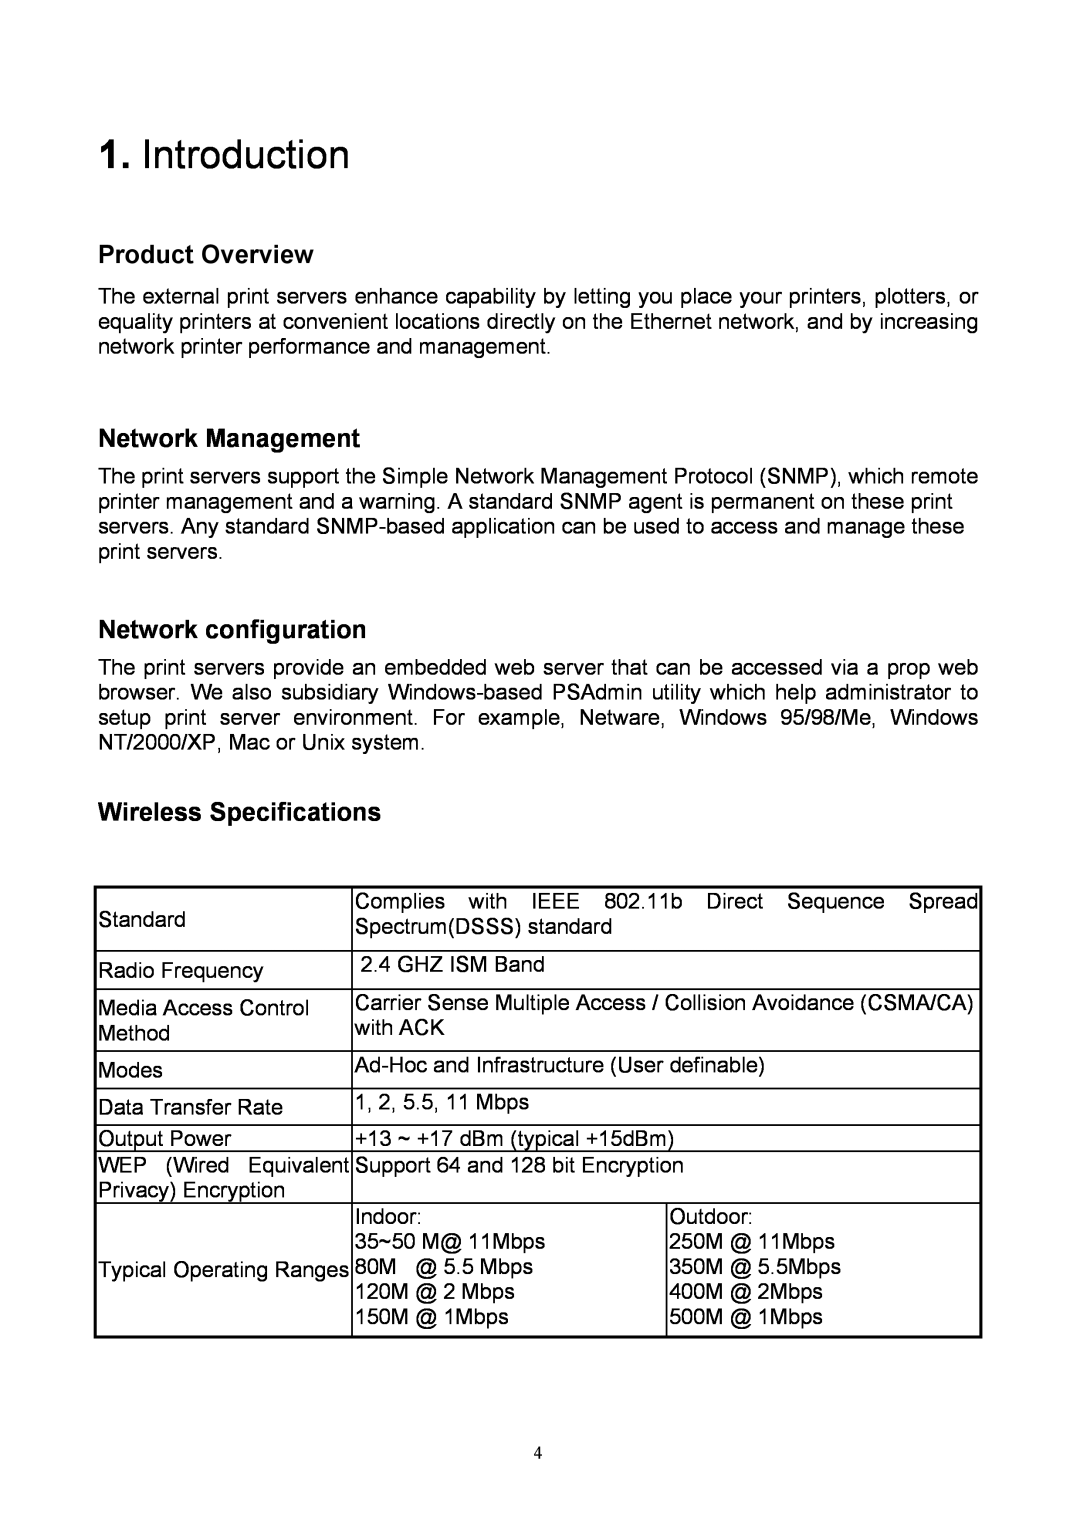 TRENDnet TEW-P1U manual Introduction, Product Overview, Network Management, Network configuration, Wireless Specifications 